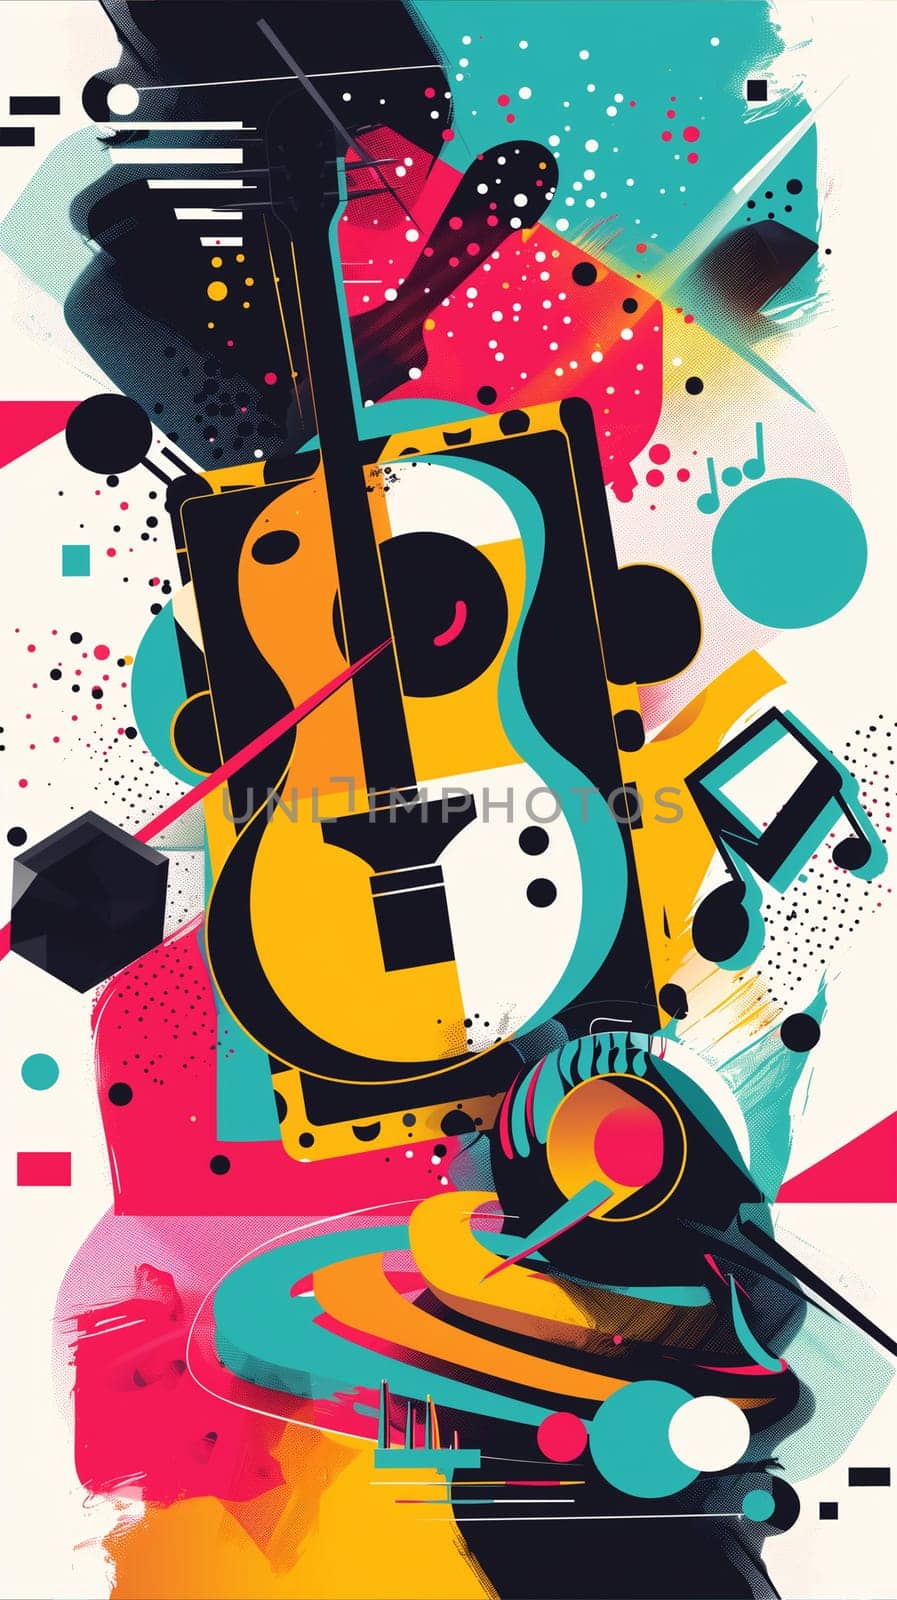 Abstract Painting With Guitar and Music Notes by Sd28DimoN_1976